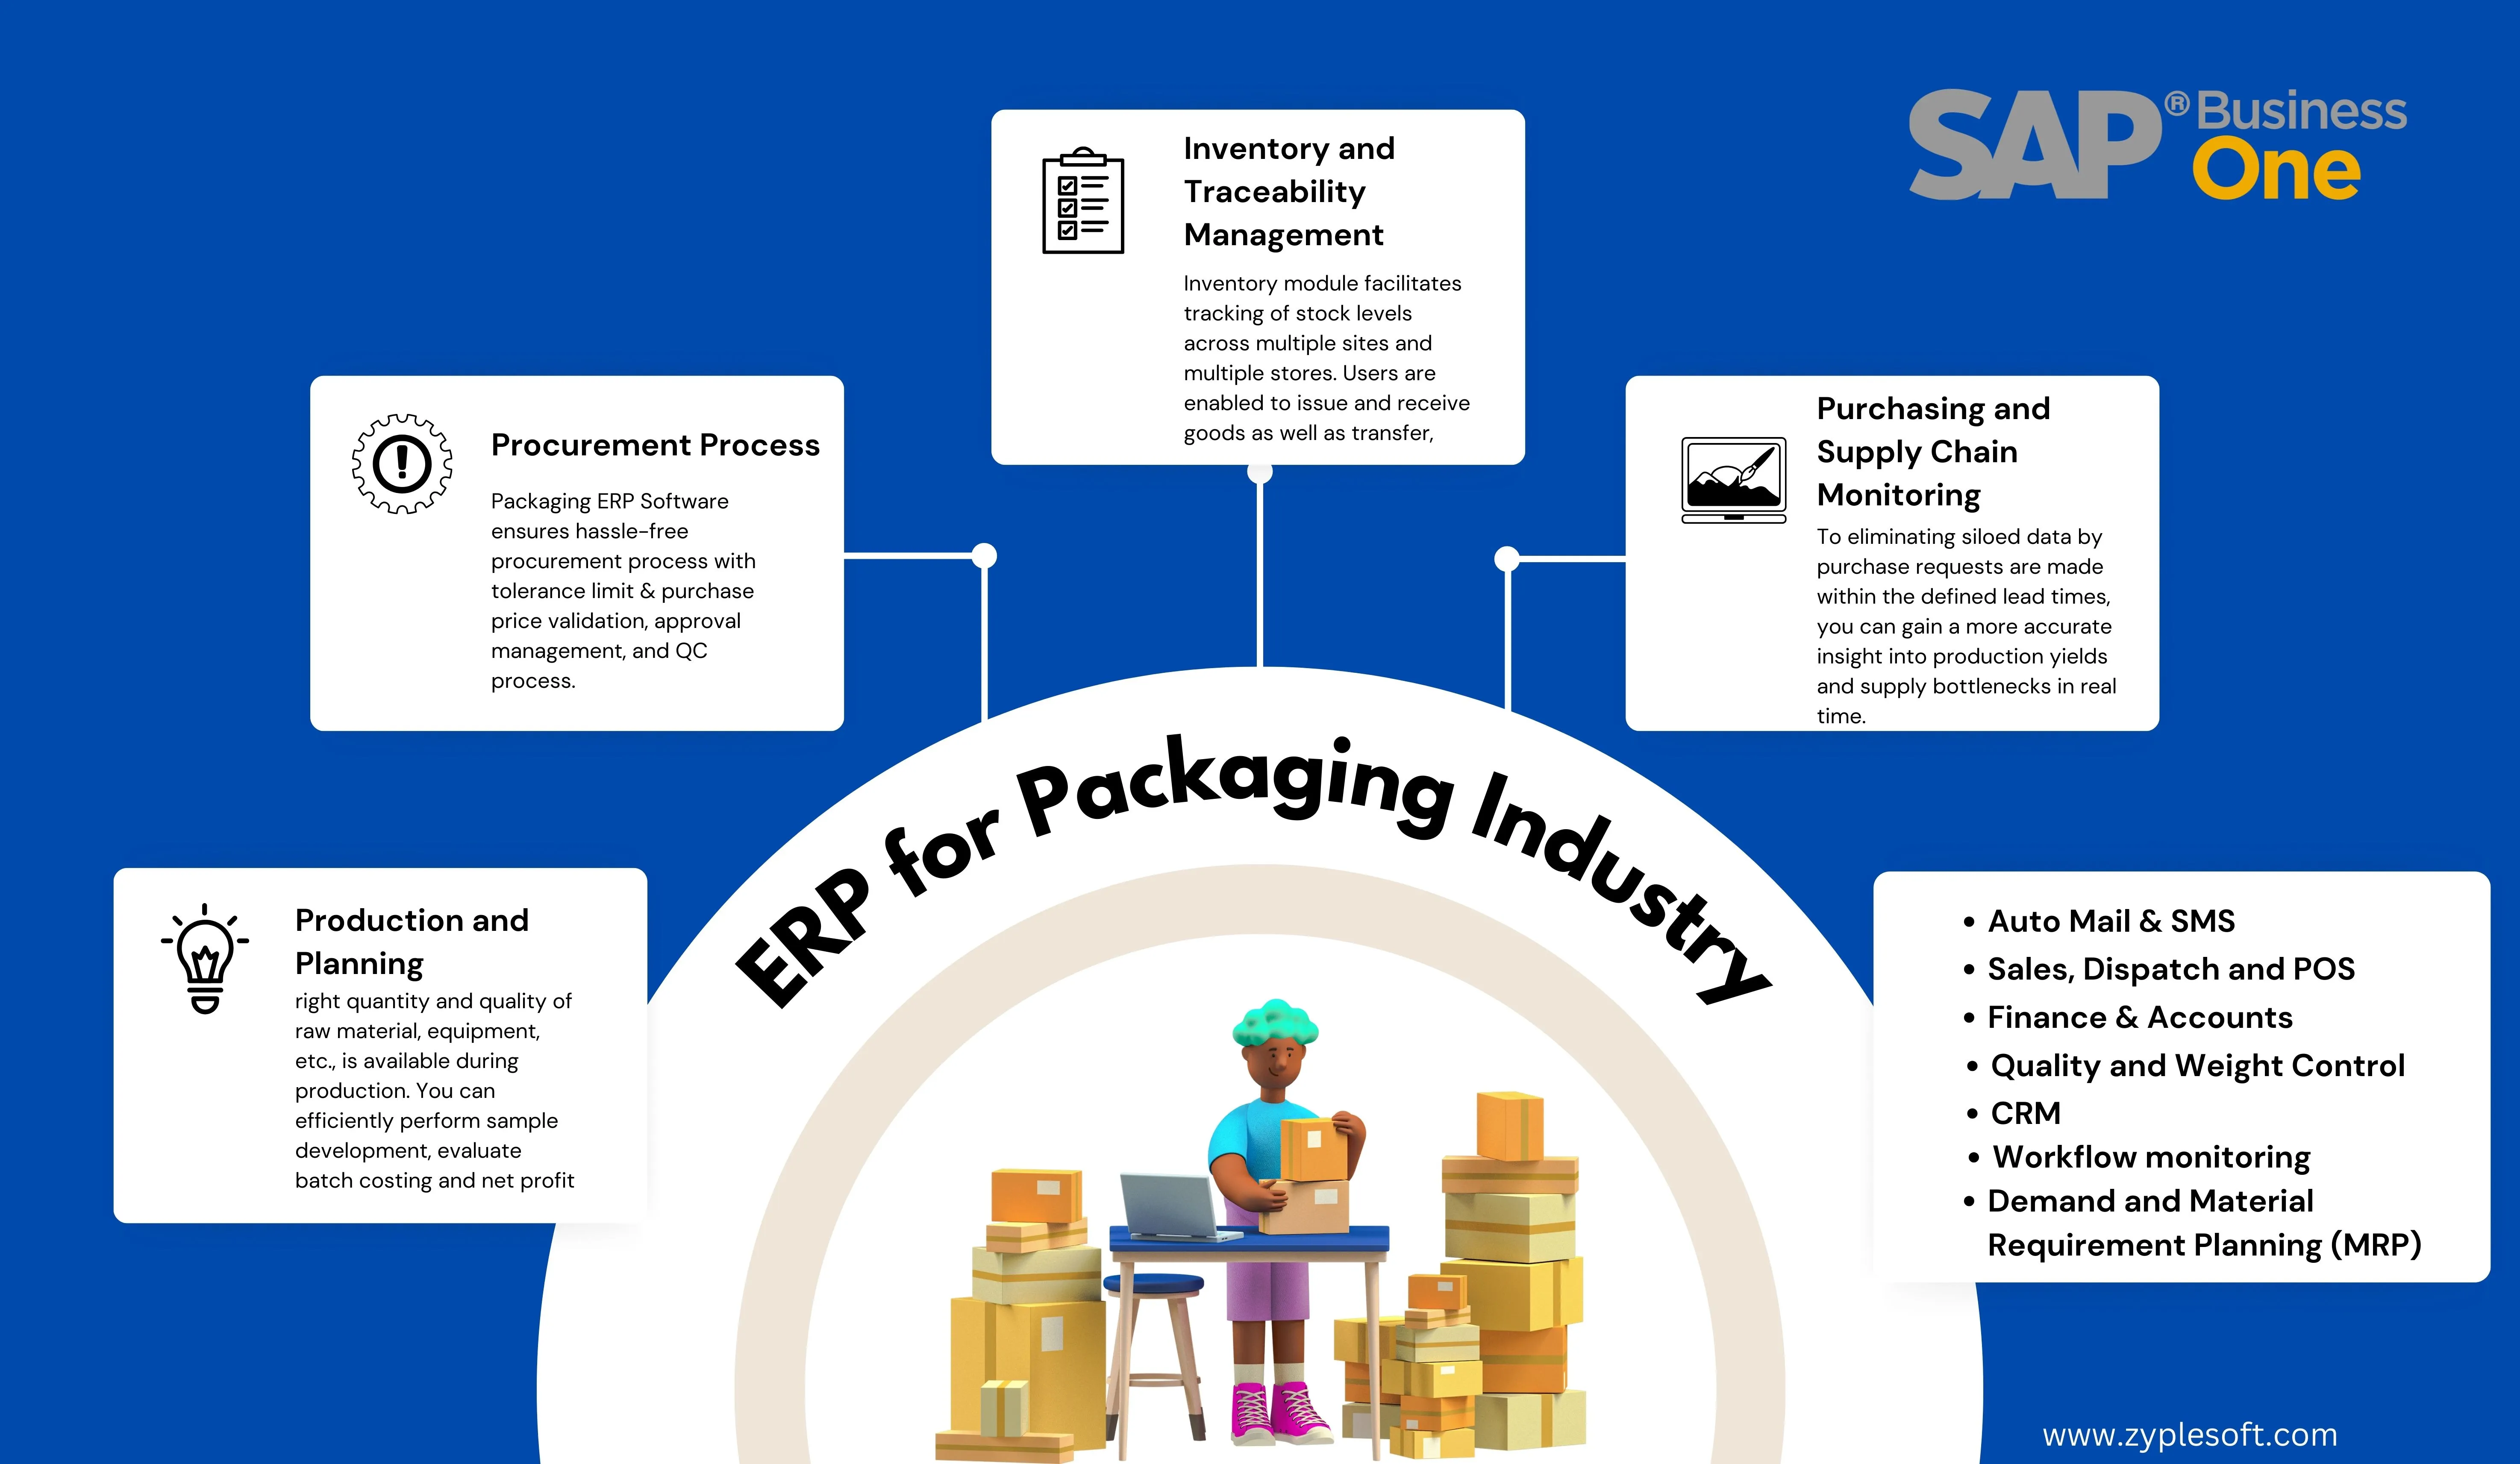 How you manage your Shipment Tracking in eCommerce through the SAP